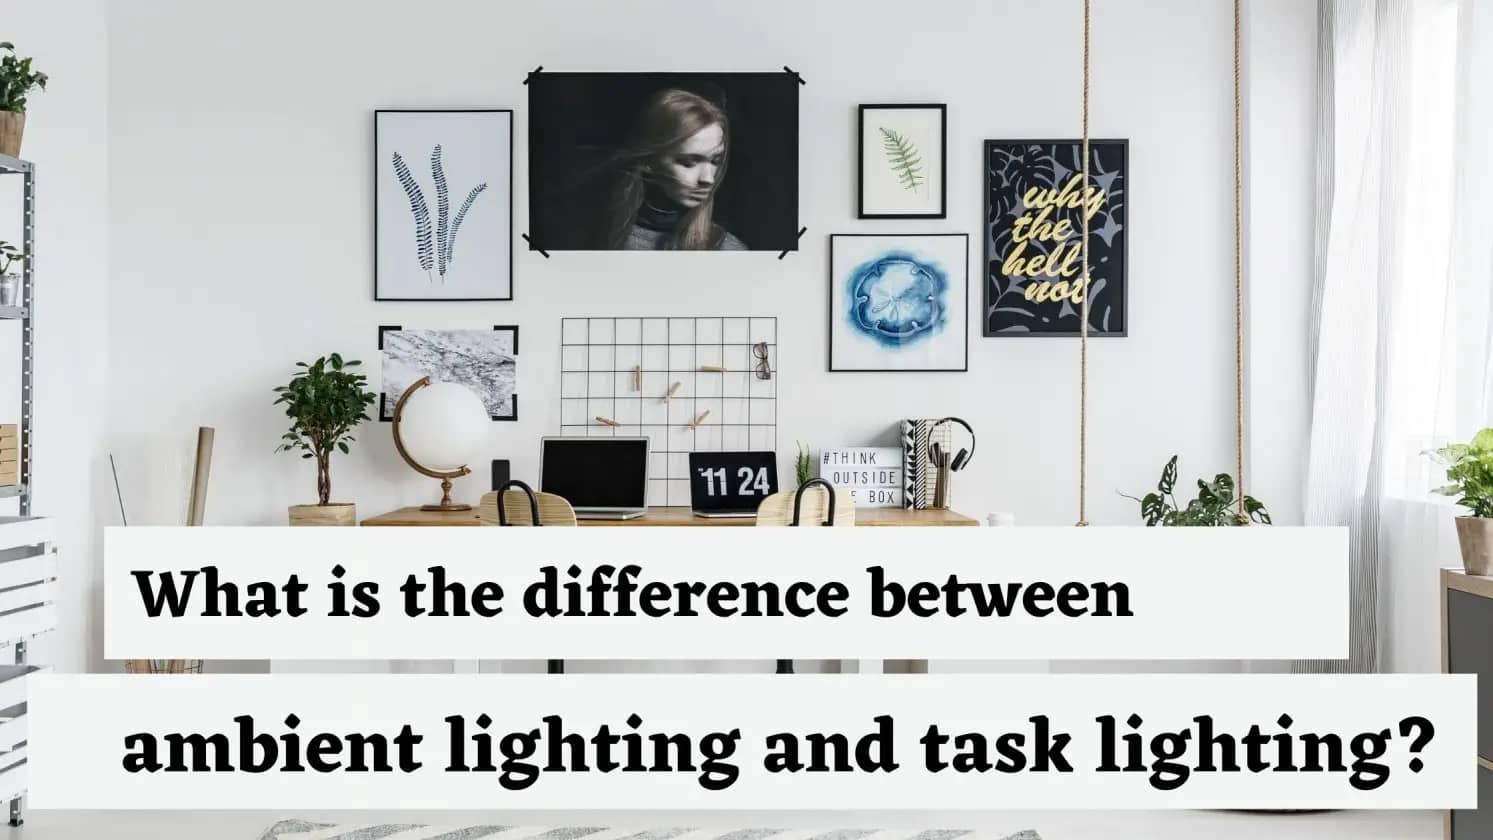 What is the difference between ambient lighting and task lighting?